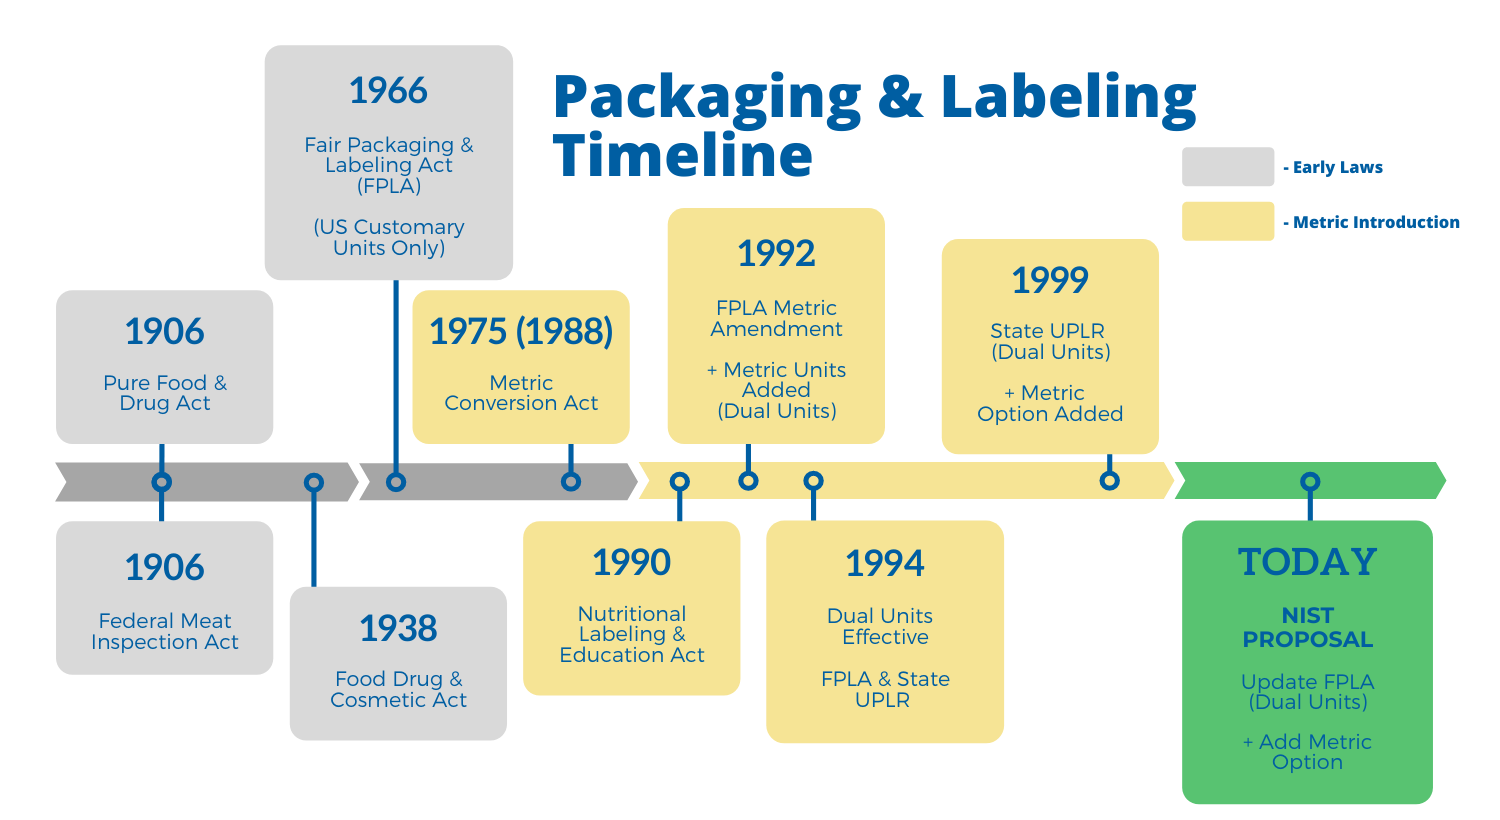 Timeline showing package and labeling highlights from 1906 through 2022